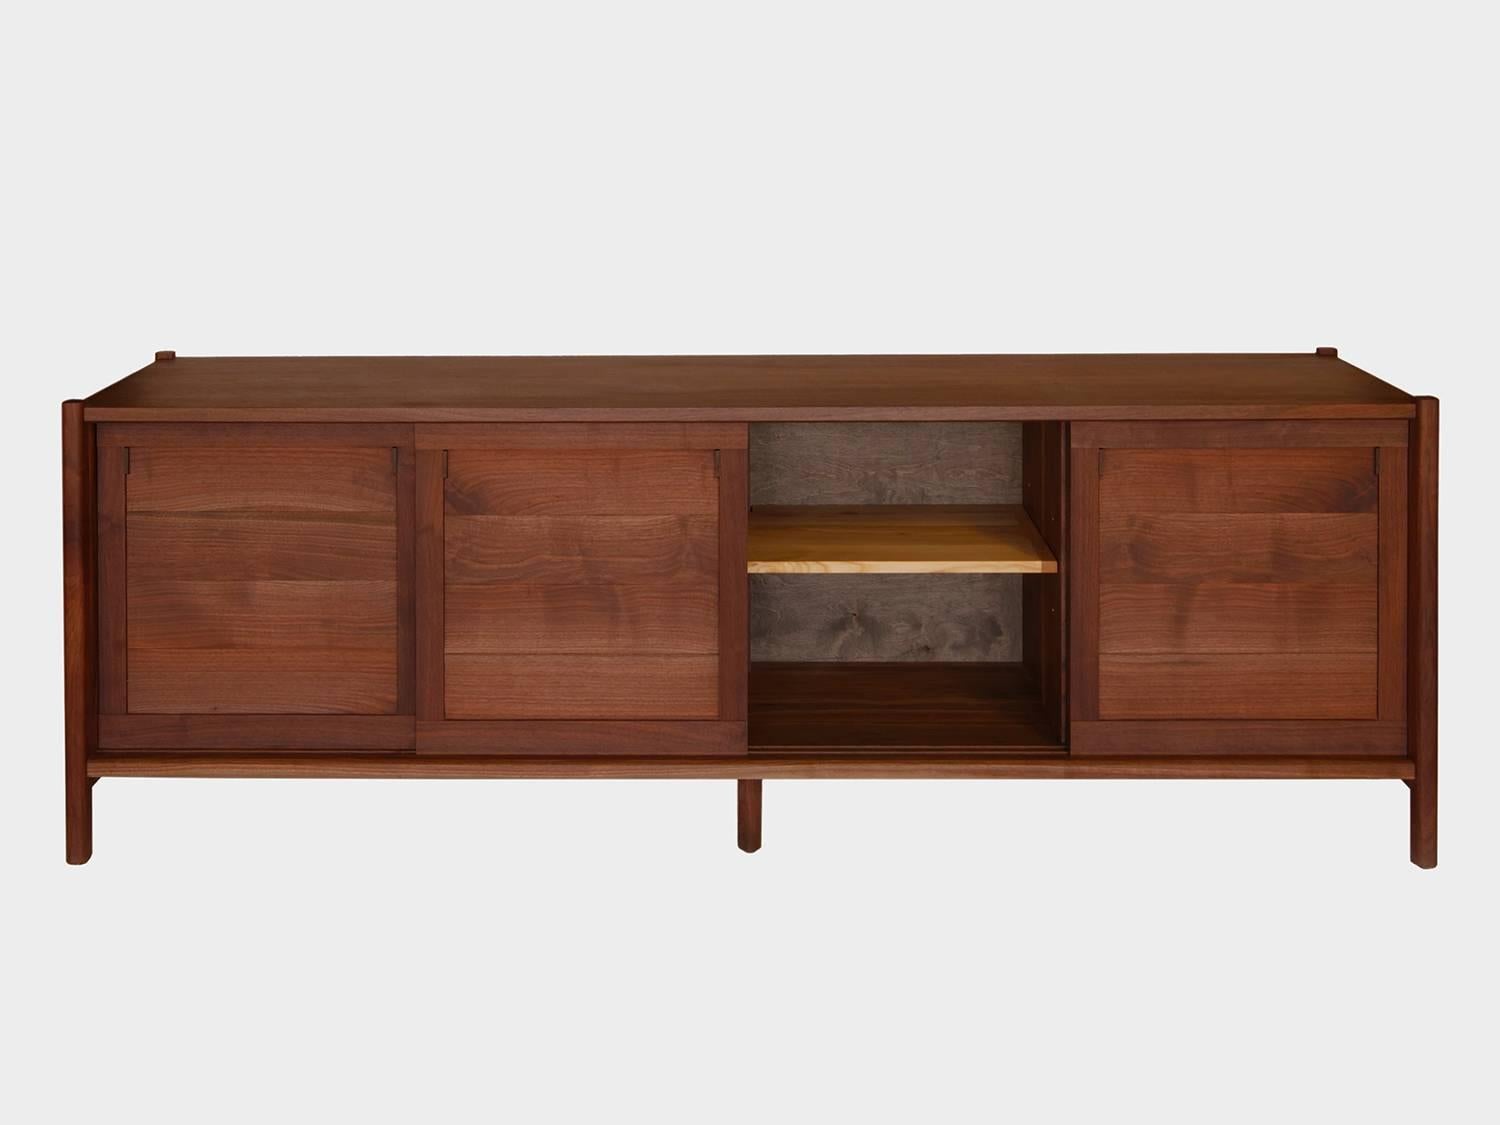 New York Heartwoods' contemporary black walnut credenza is influenced by Mid-Century Modern design and fabricated from solid wood, save the ebonized FSC paneled back. Each cabinet has great storage capacity and is comprised of four artfully